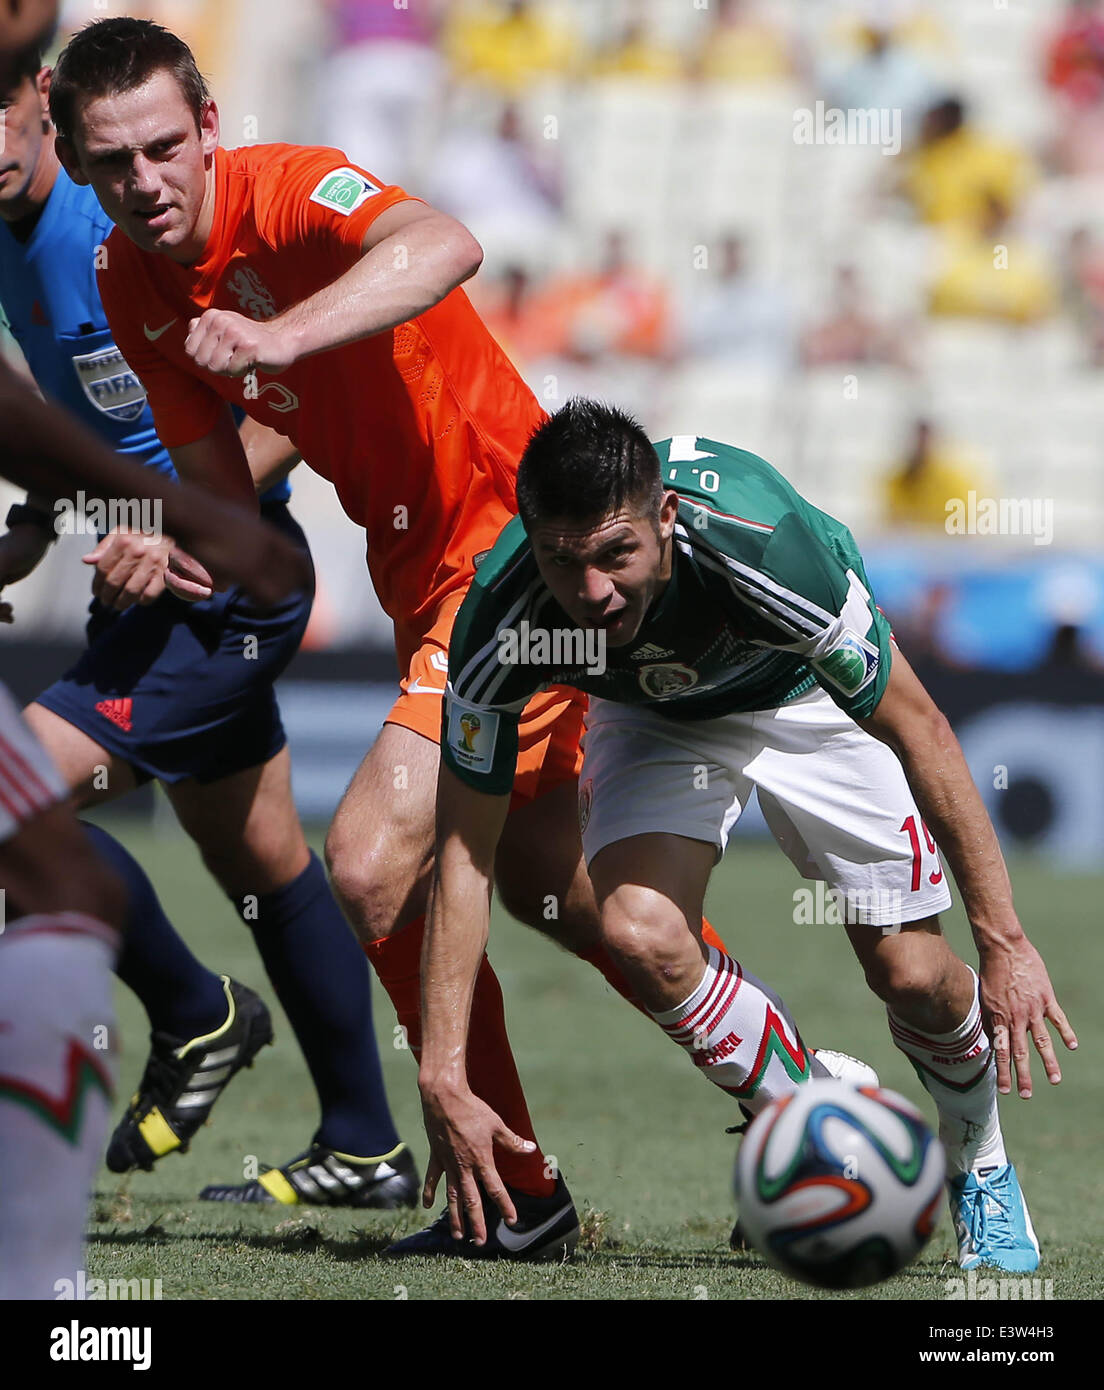 Fortaleza, Brazil. 29th June, 2014. Mexico's Oribe Peralta vies for the ball during a Round of 16 match between Netherlands and Mexico of 2014 FIFA World Cup at the Estadio Castelao Stadium in Fortaleza, Brazil, on June 29, 2014. Credit:  Zhou Lei/Xinhua/Alamy Live News Stock Photo